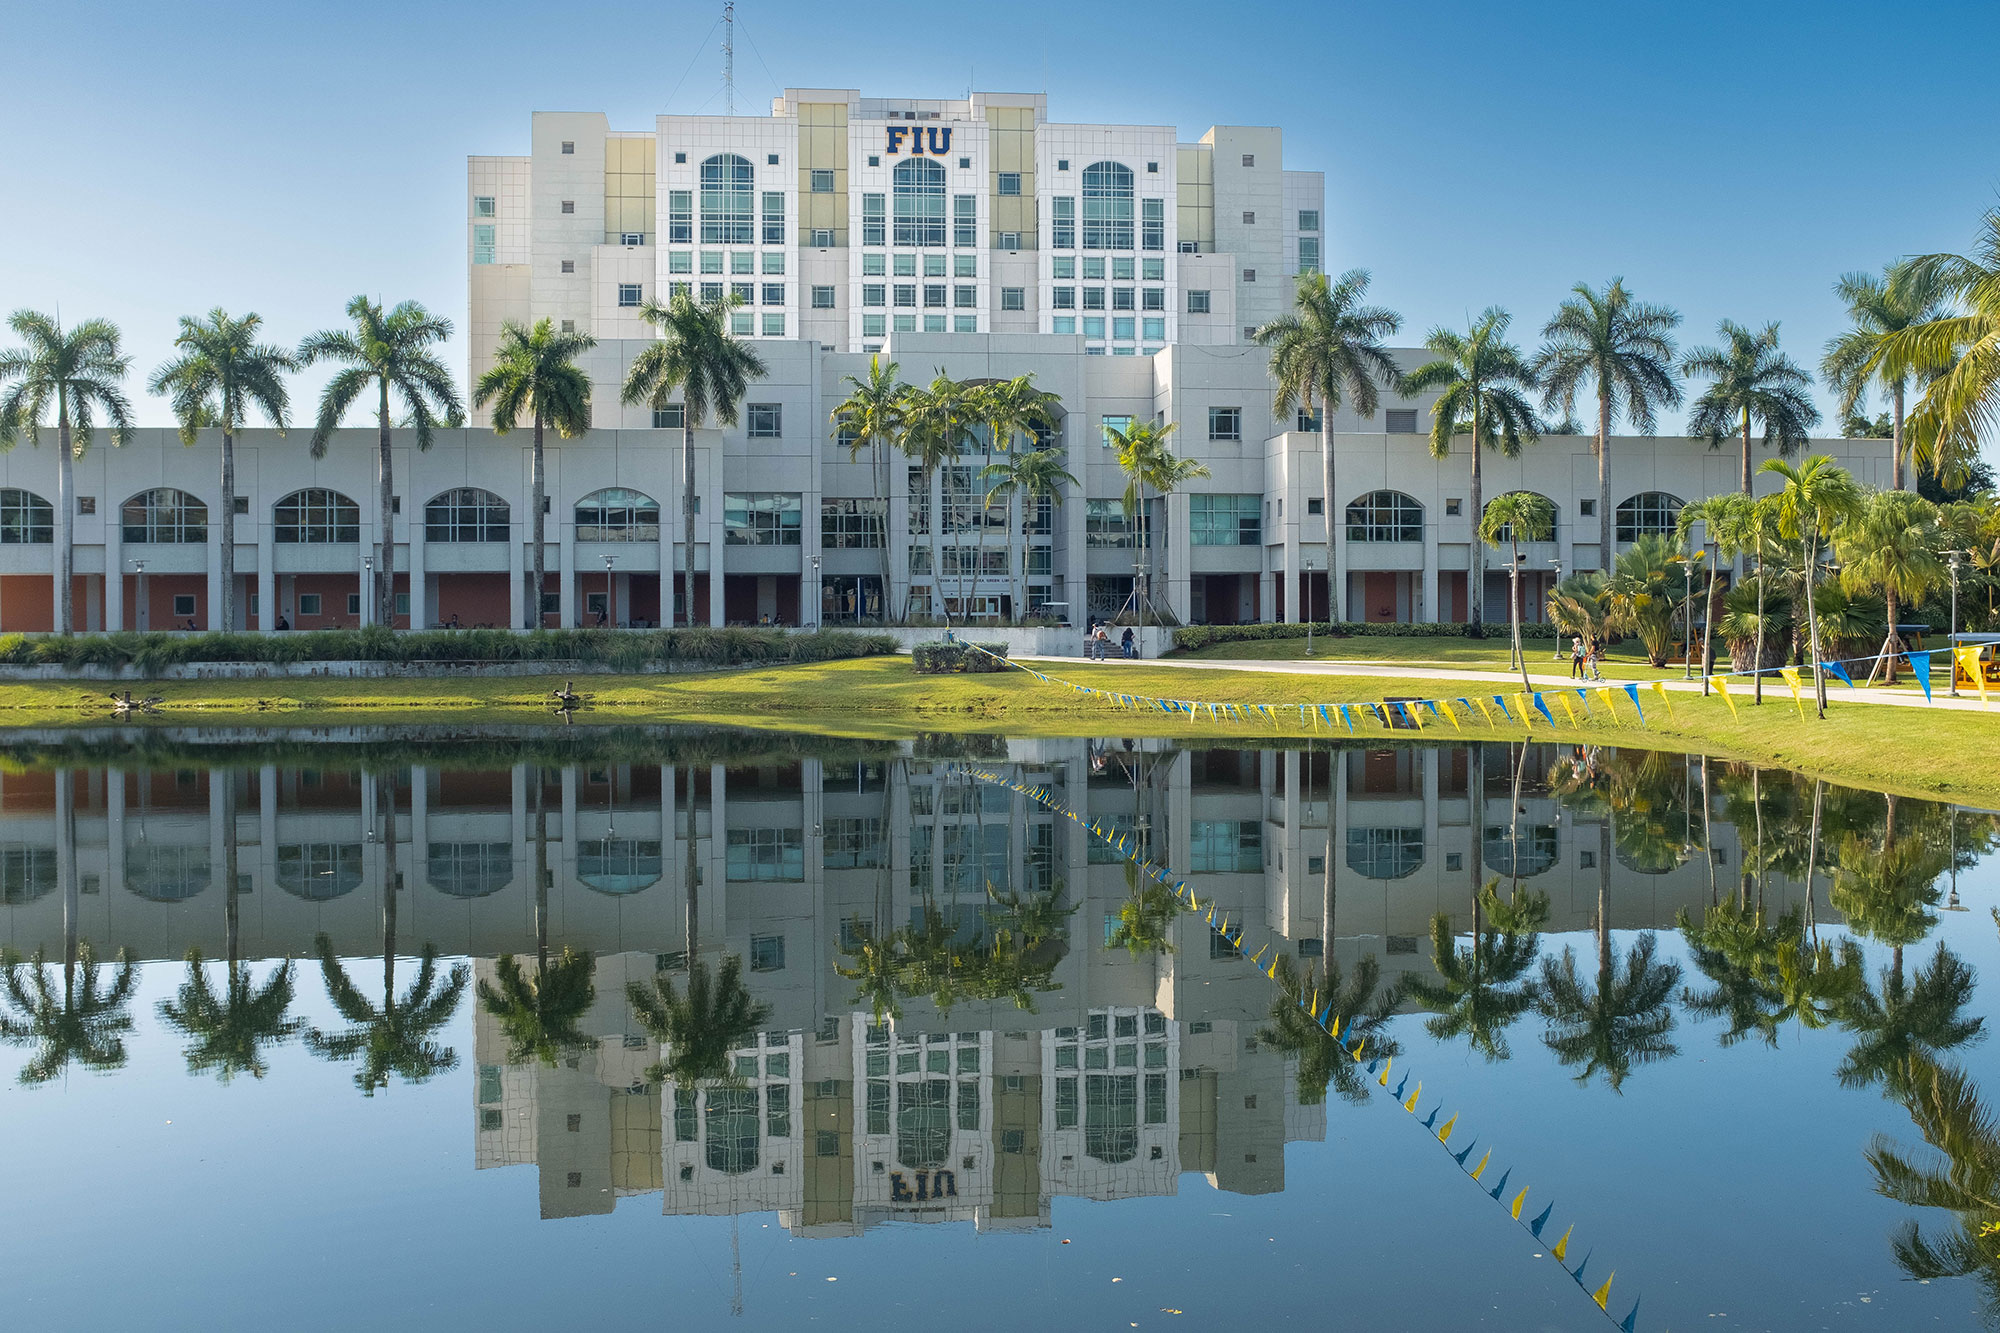 Kovens Conference Center at FIU's Biscayne Bay Campus